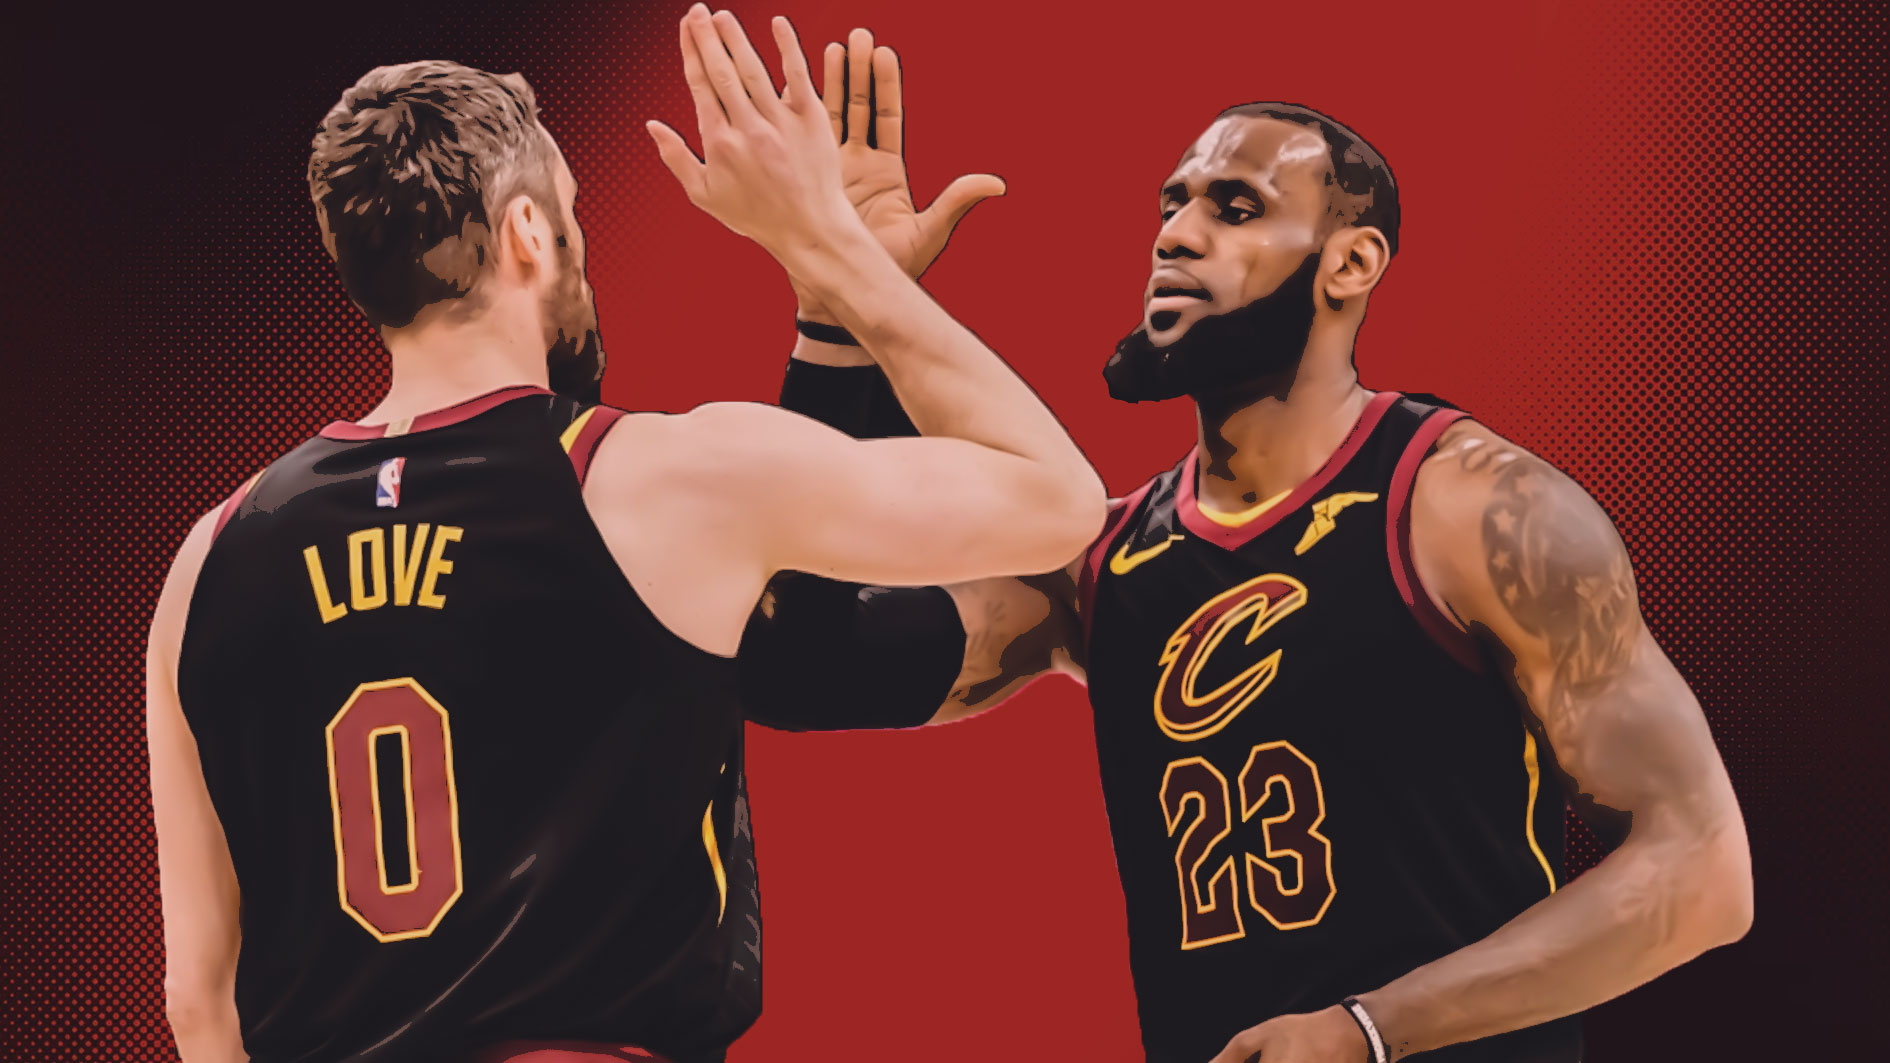 The Cavs are finally getting healthy - and it's happening at the perfect time